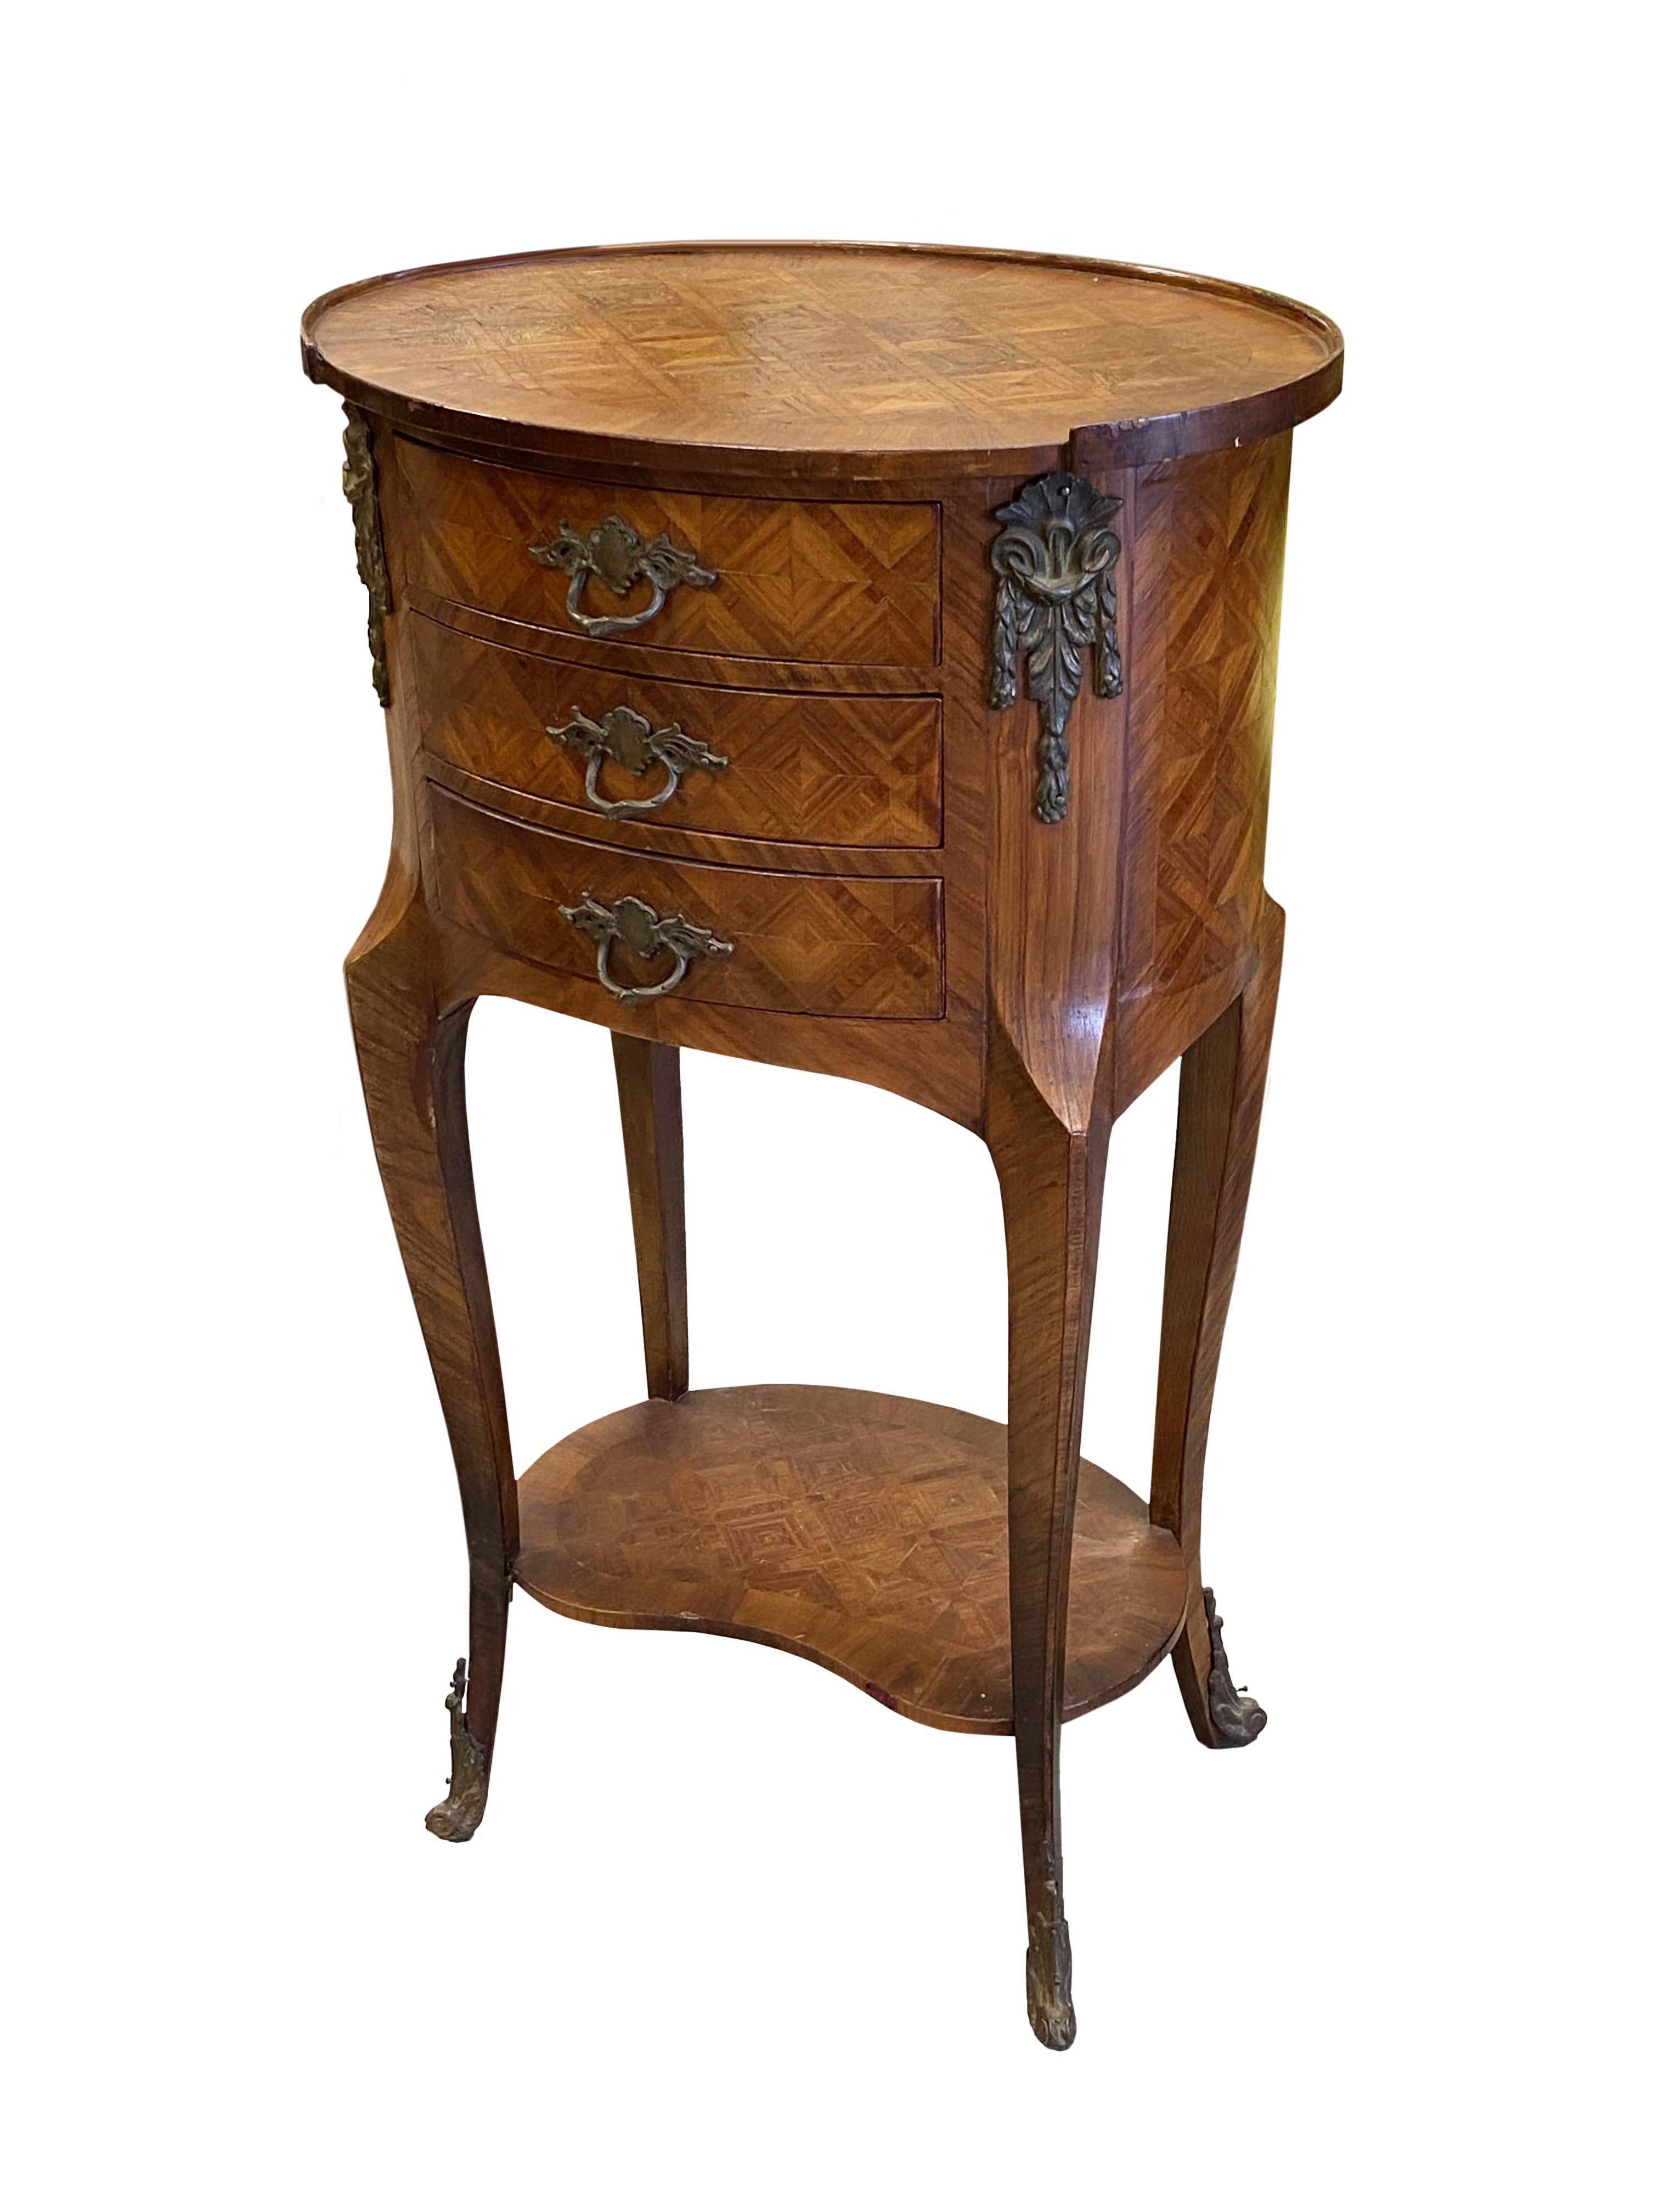 Louis XVI marquetry inlay side table with bronze mounts and pulls, feet are bronze sabot. With wood gallery edge. Inlaid shelf and three drawers. Can float in room finished all the way around. Circa 1800s, France.